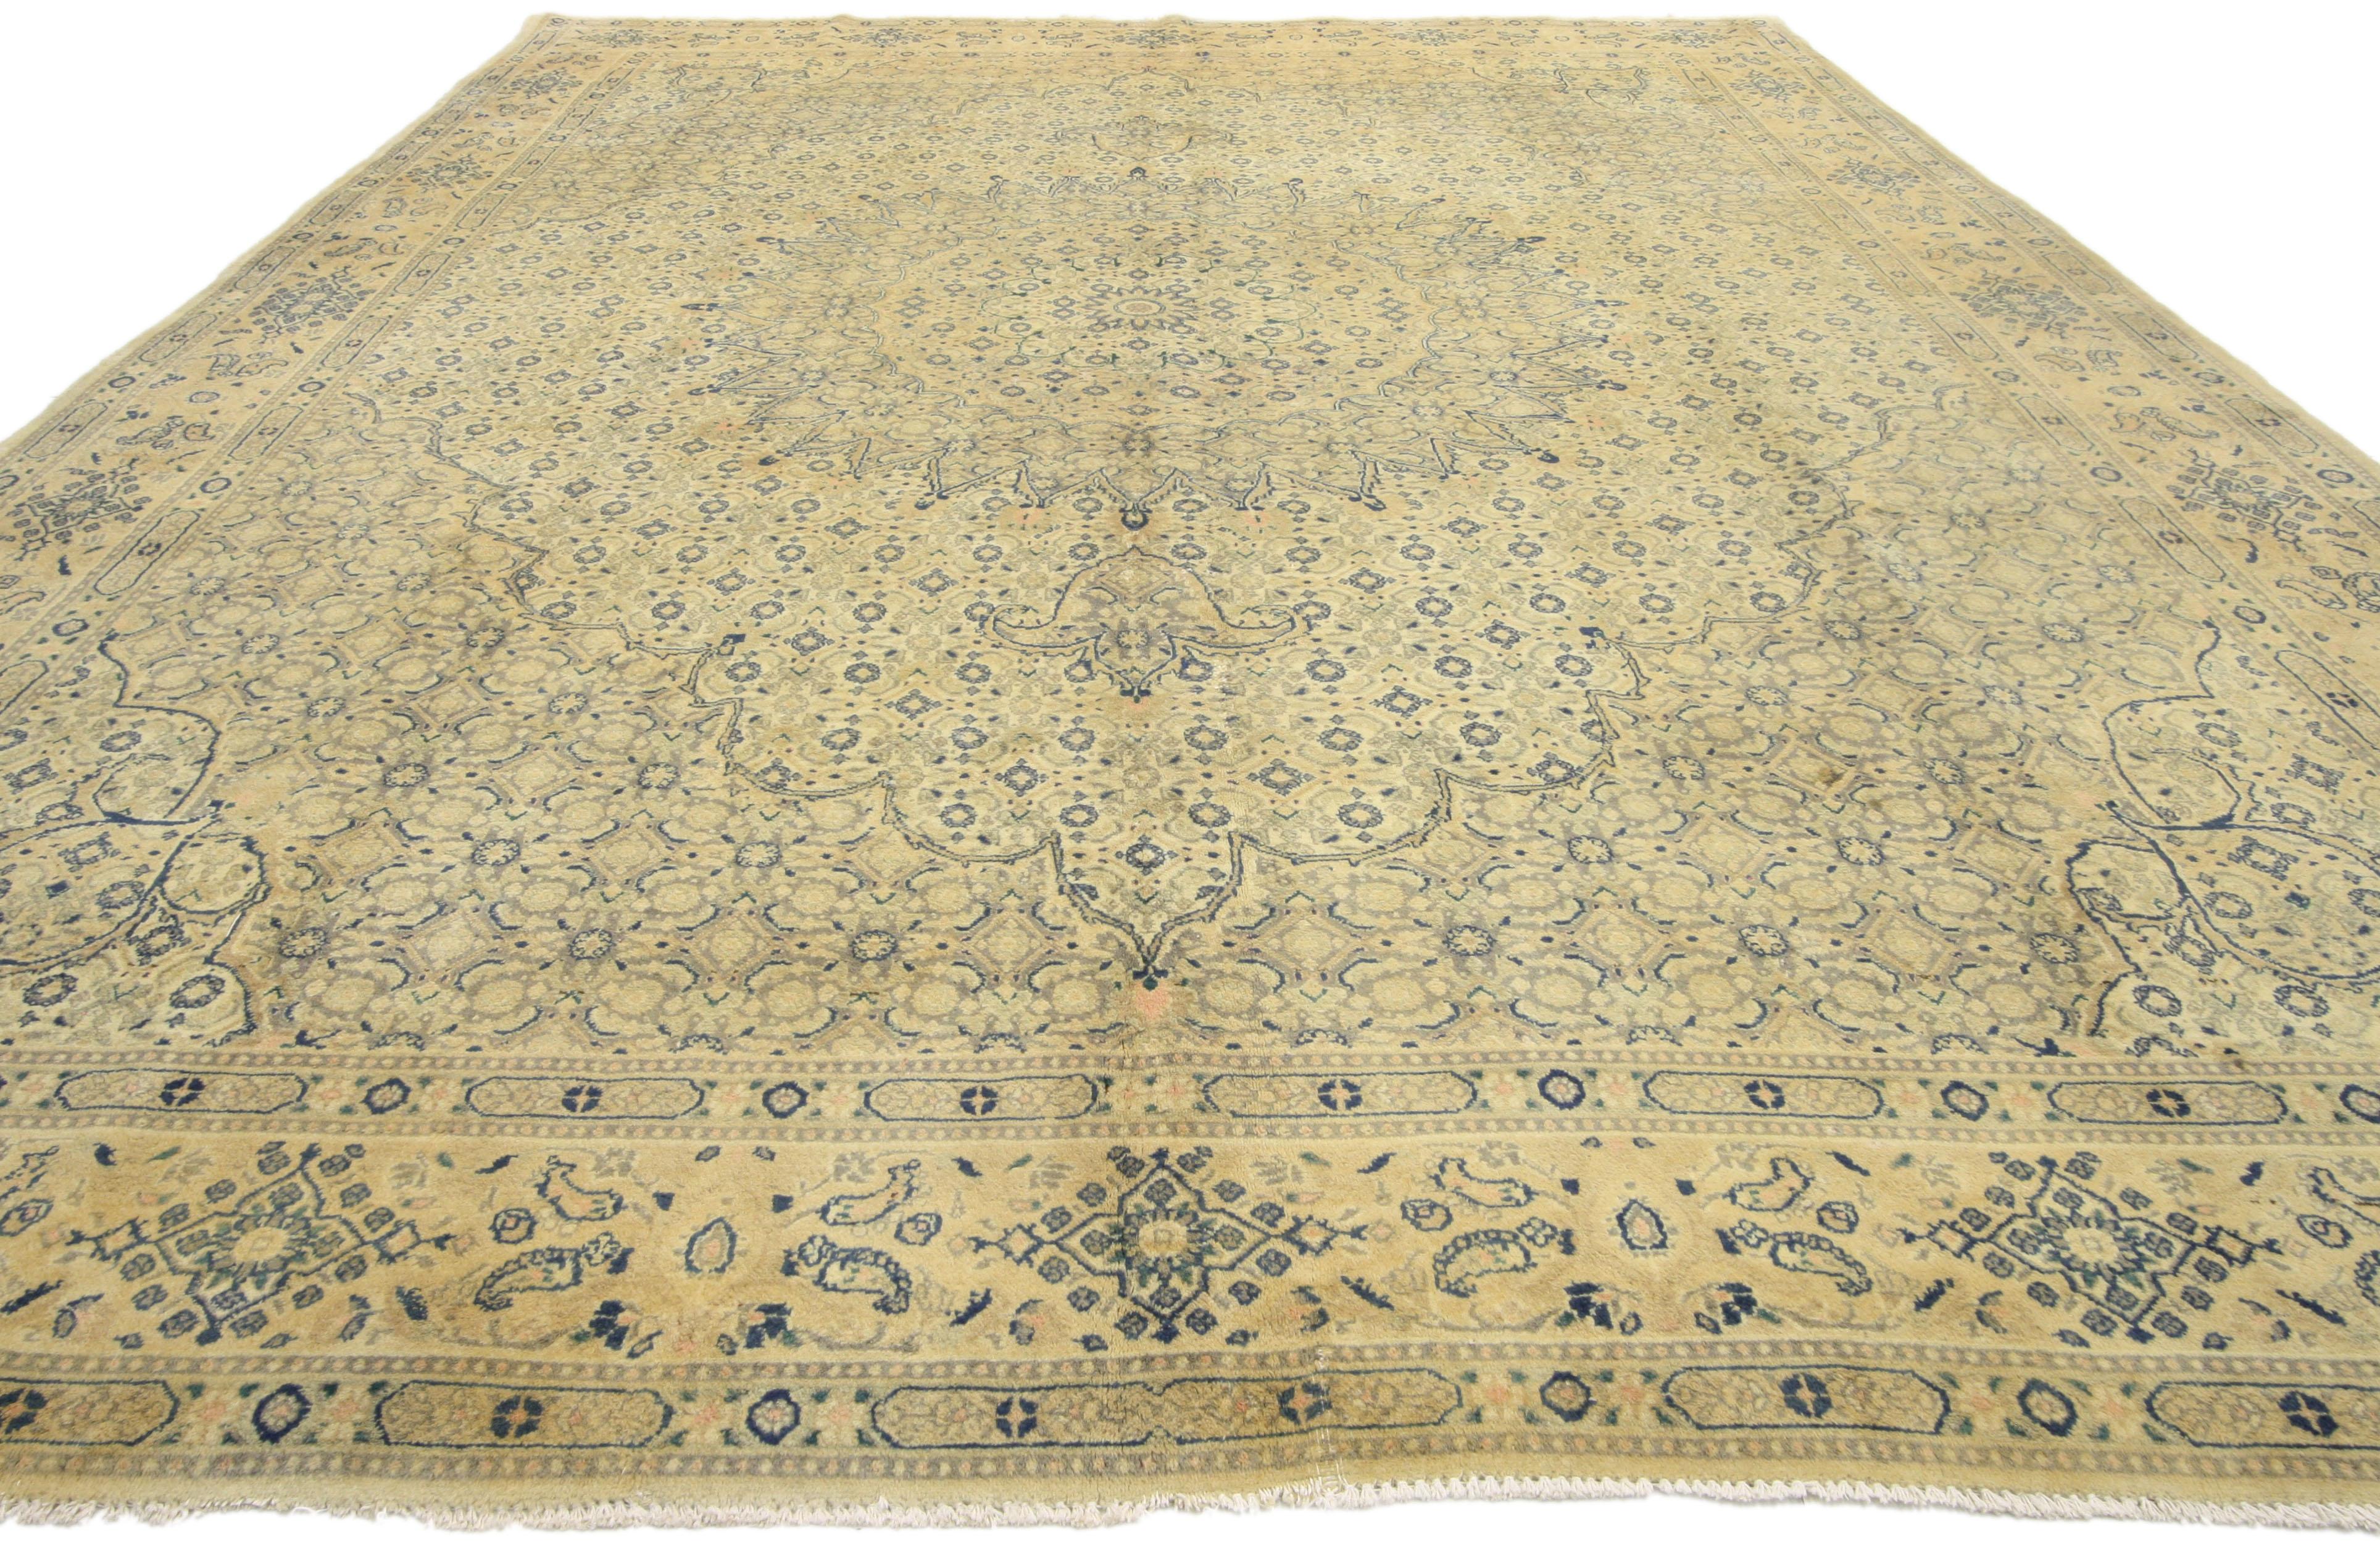 76584, vintage Persian Khorassan rug with French country style. Lustrous and decadent, a brilliant lobed orb ornaments the centre of this hand knotted wool vintage Persian Khorassan area rug with French Country style. Elaborate pendants extend from